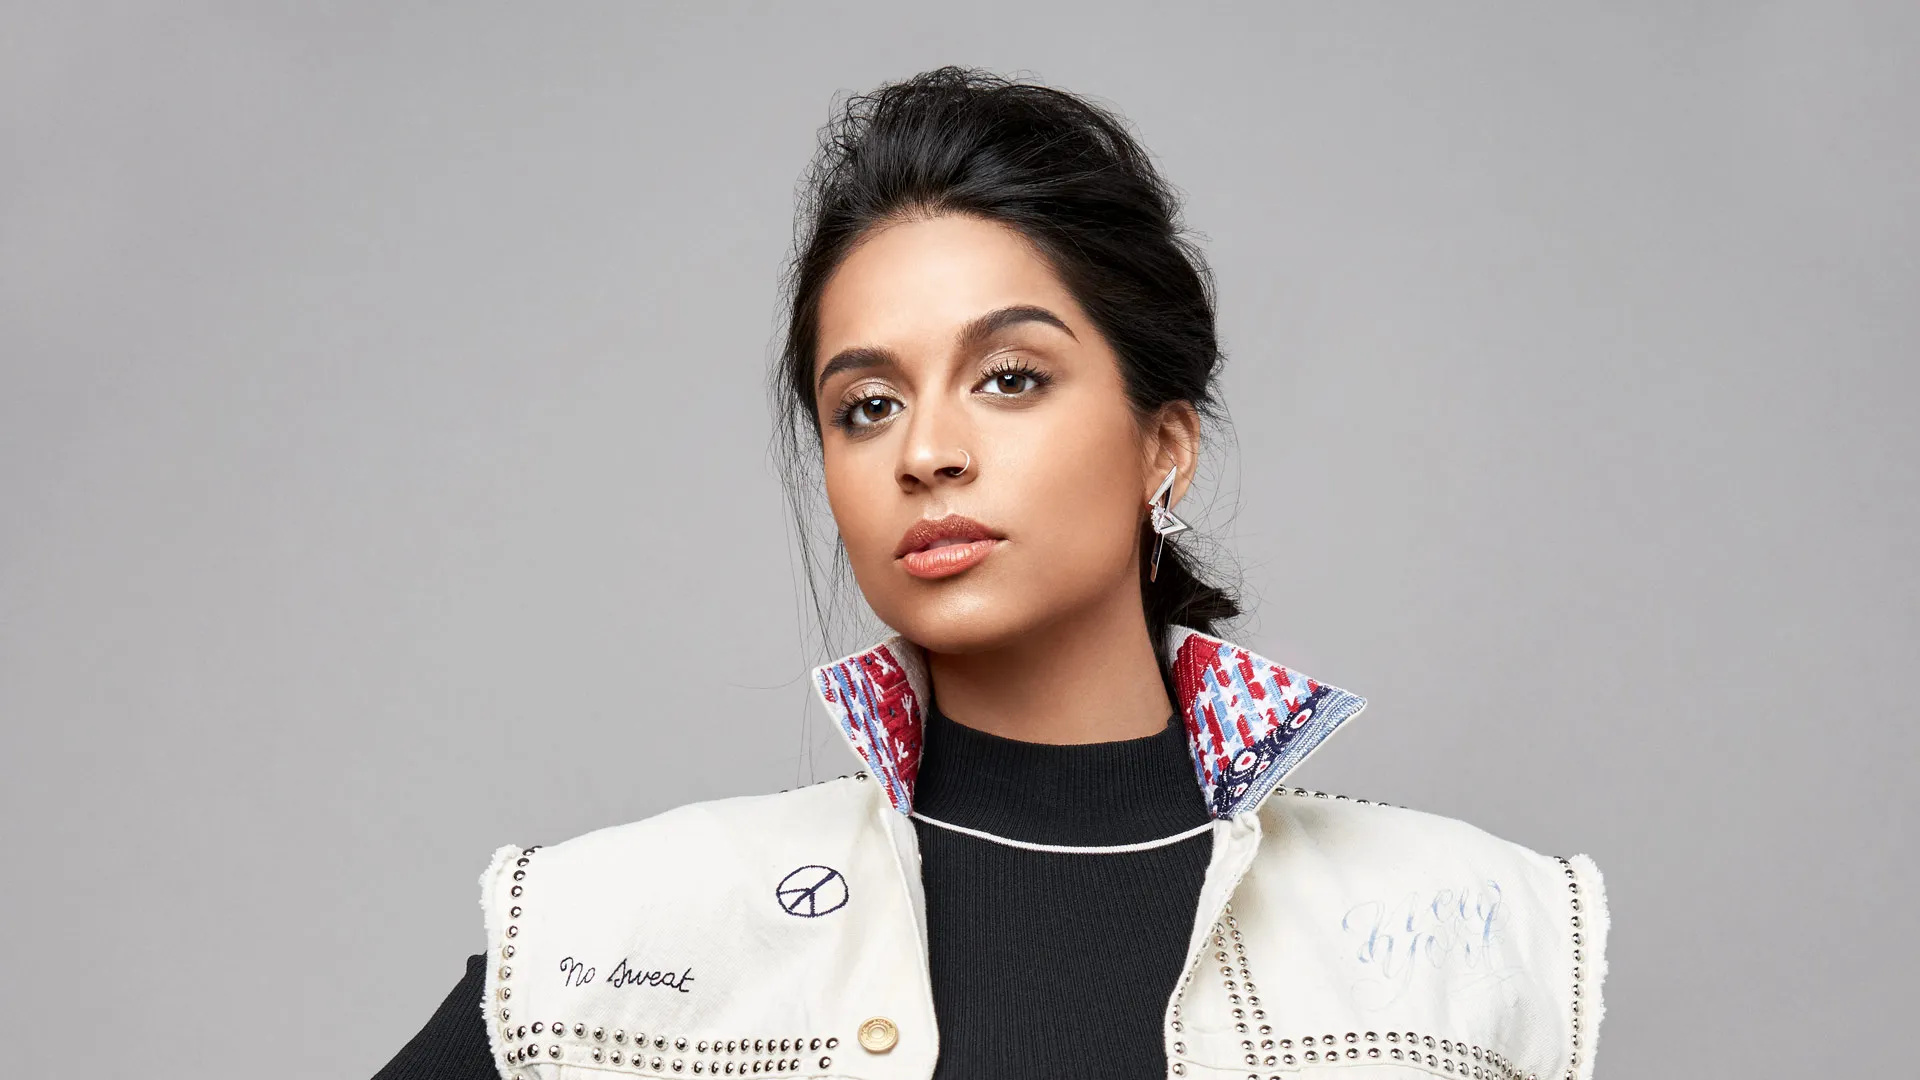 Lilly Singh, Incredible Indian women, Global recognition, Vogue India feature, 1920x1080 Full HD Desktop